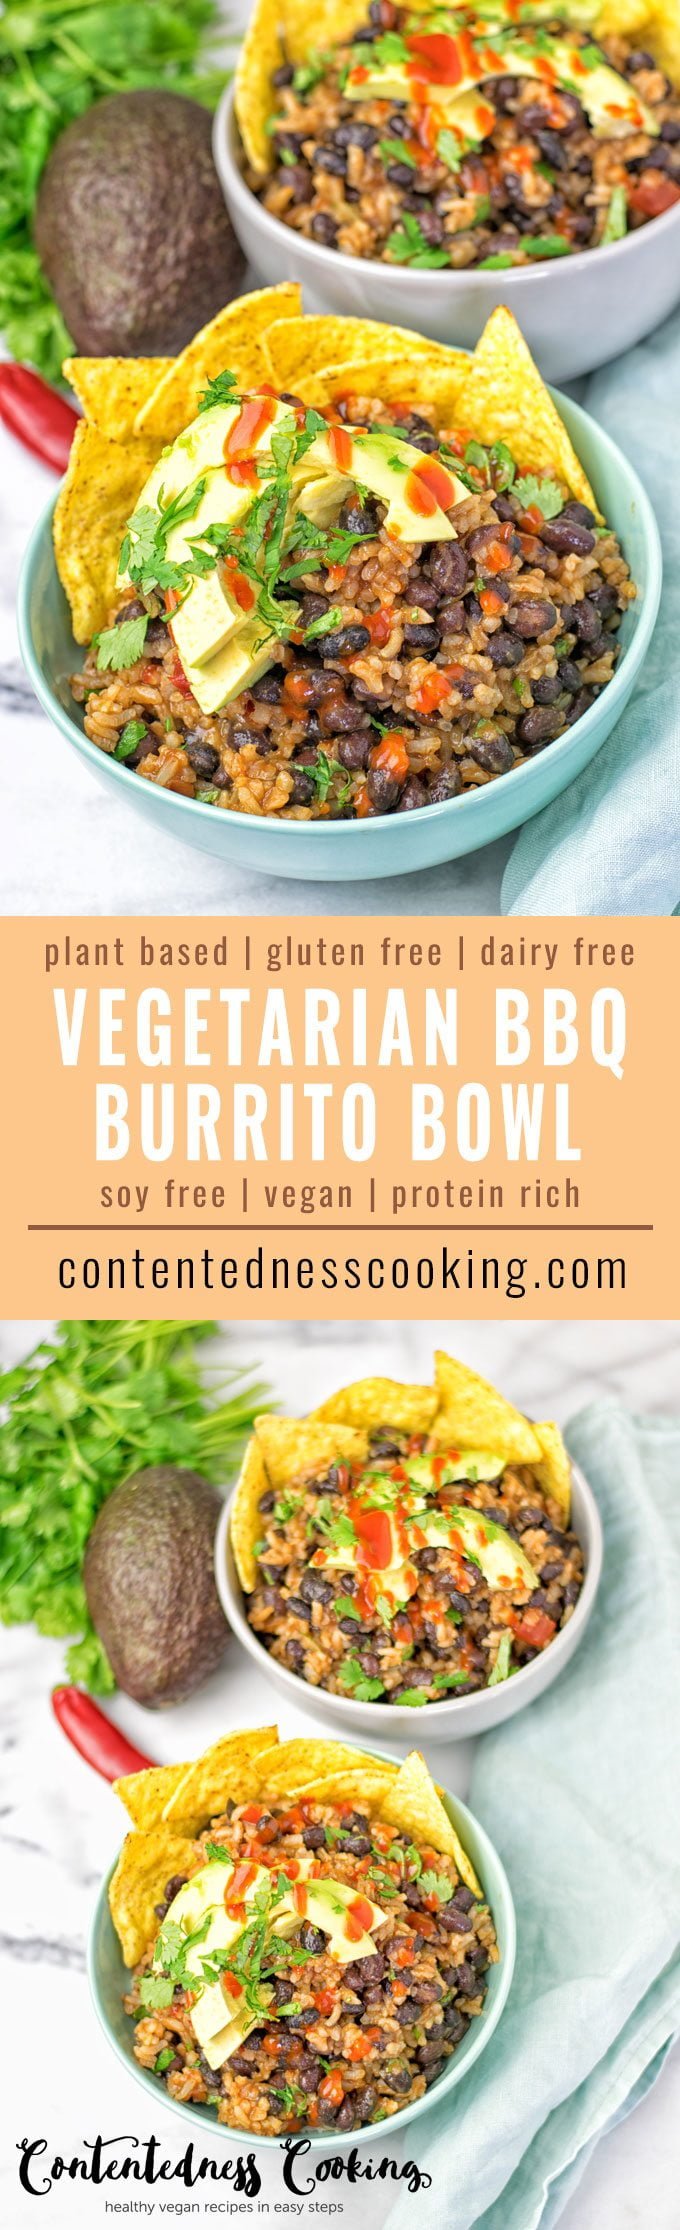 Collage of two pictures of the Vegetarian BBQ Burrito Bowl with recipe title text